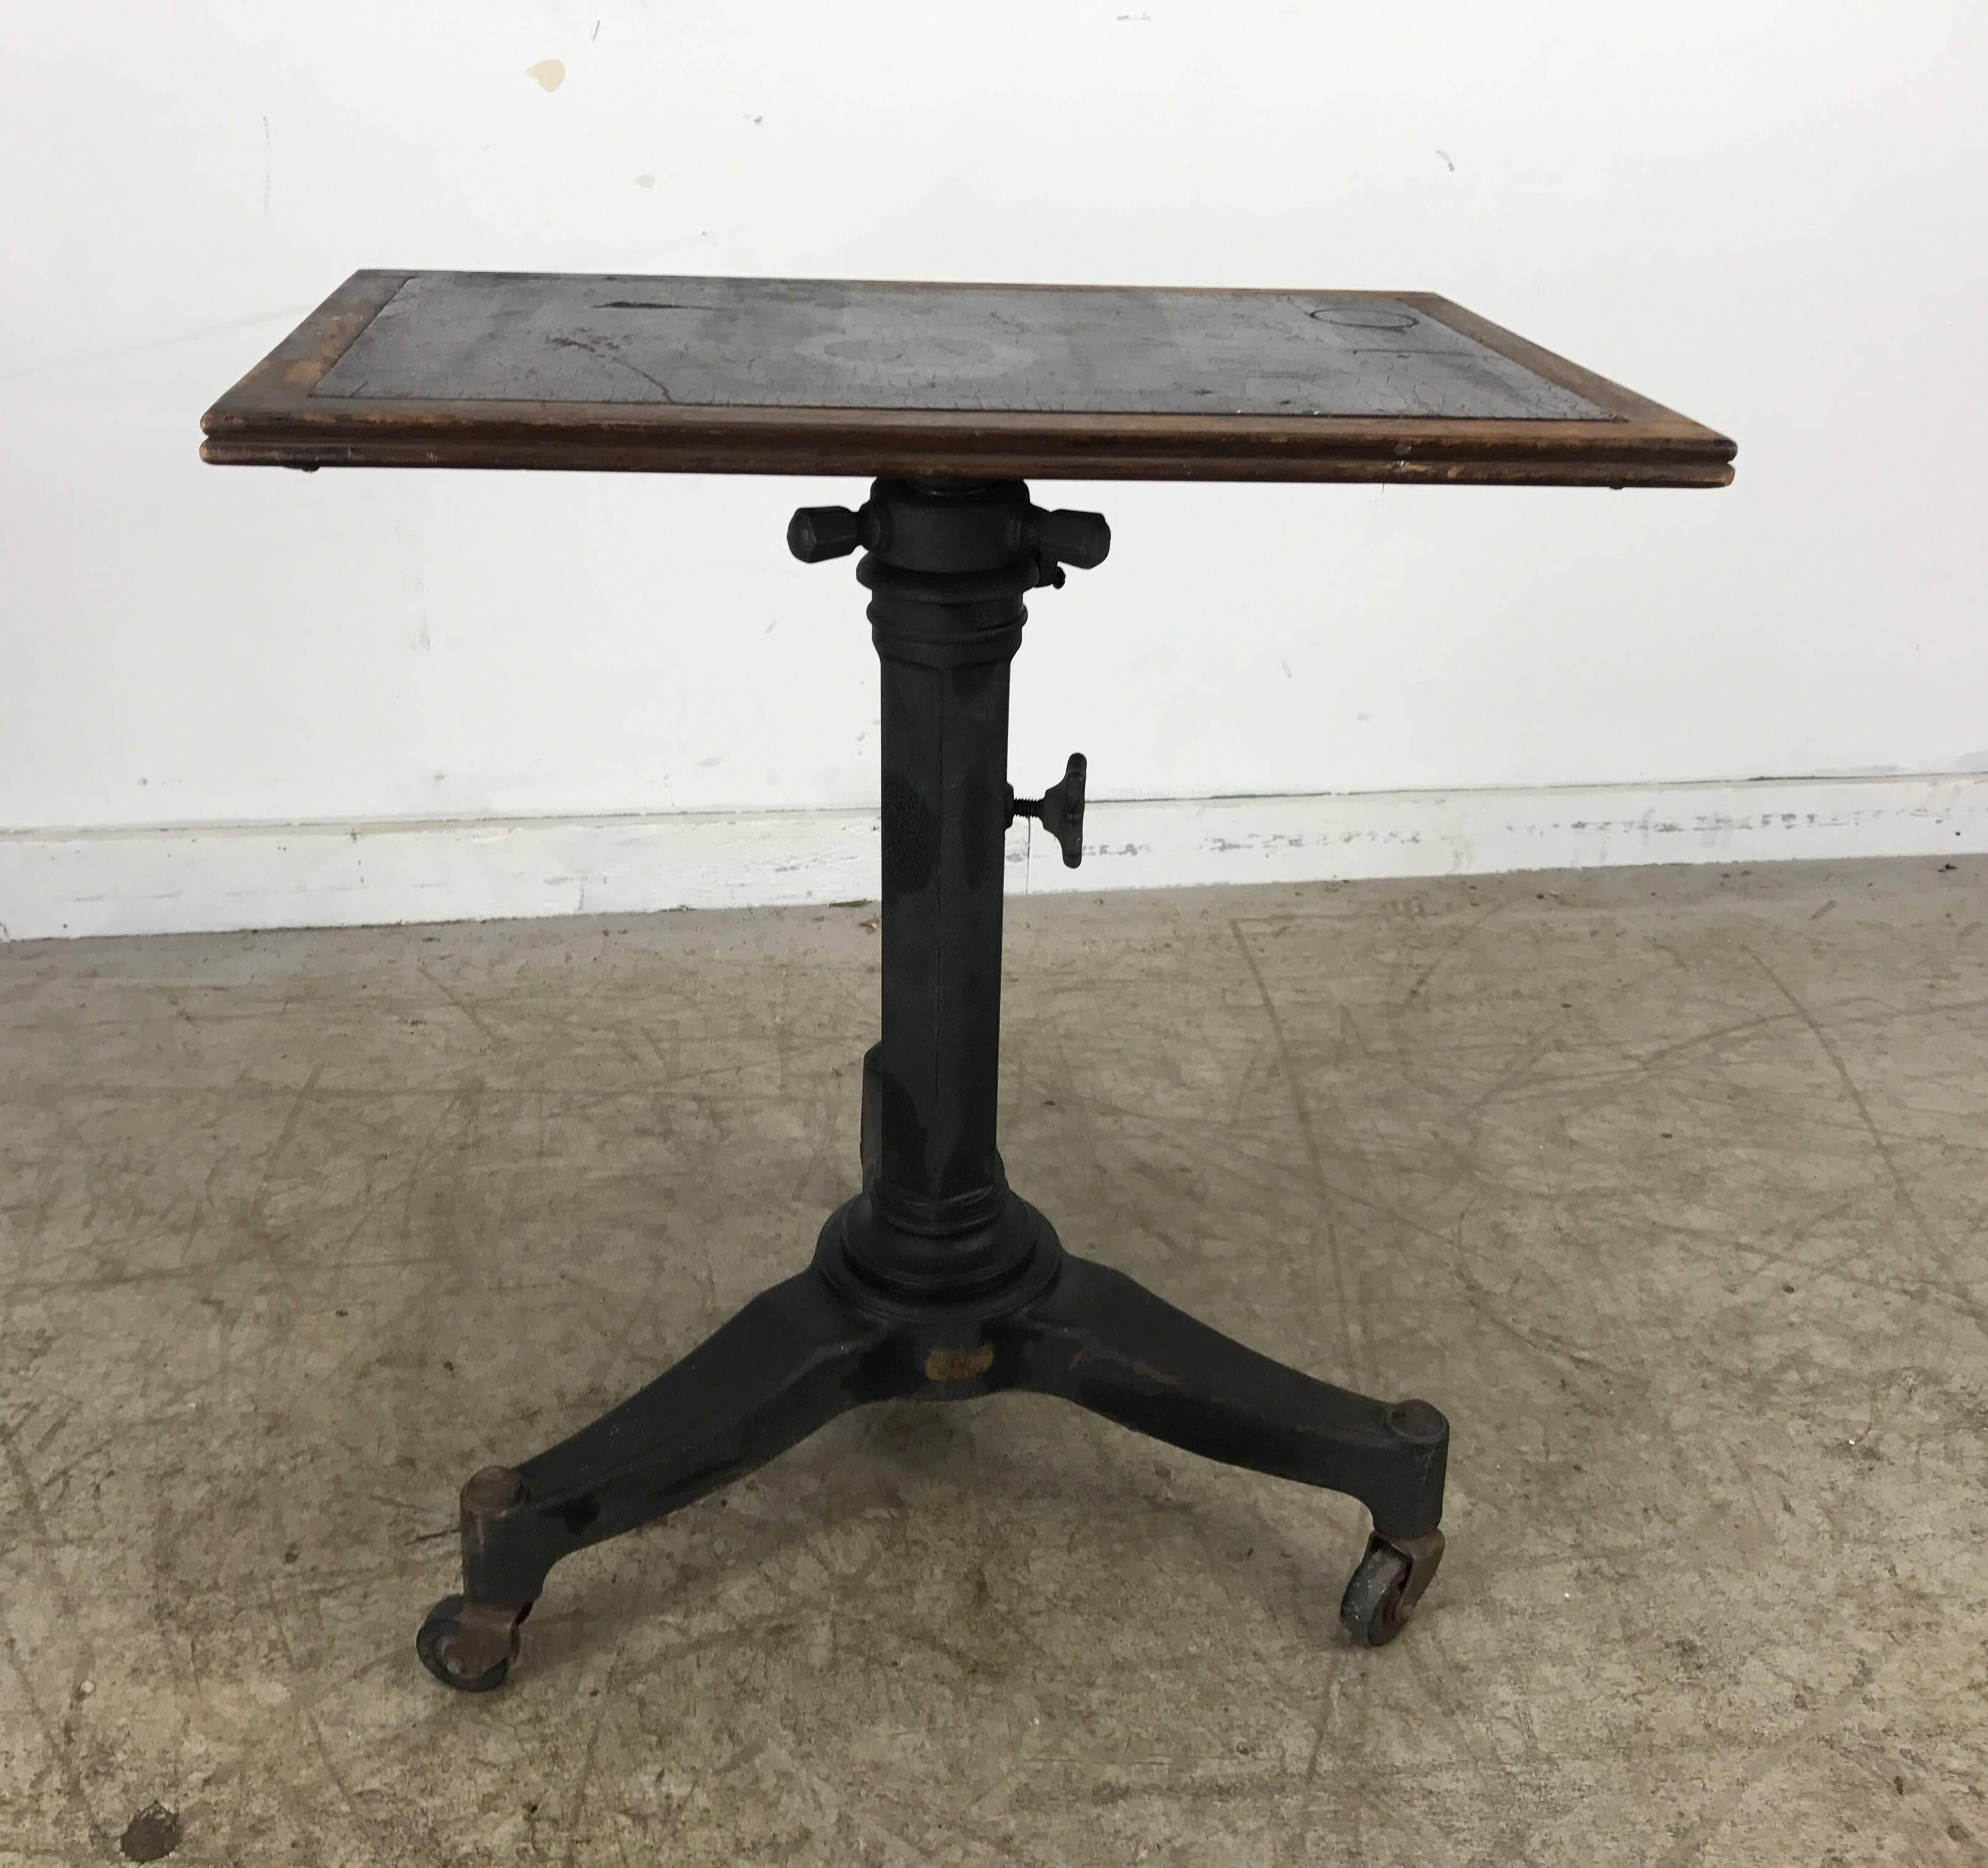 Telescopic cast iron and wood table/stand. Karl Manufacturing Co. Strong, simple architectural design. Classic 1920s cast iron base, locks in place measuring 25 inch high to 38 inch high.